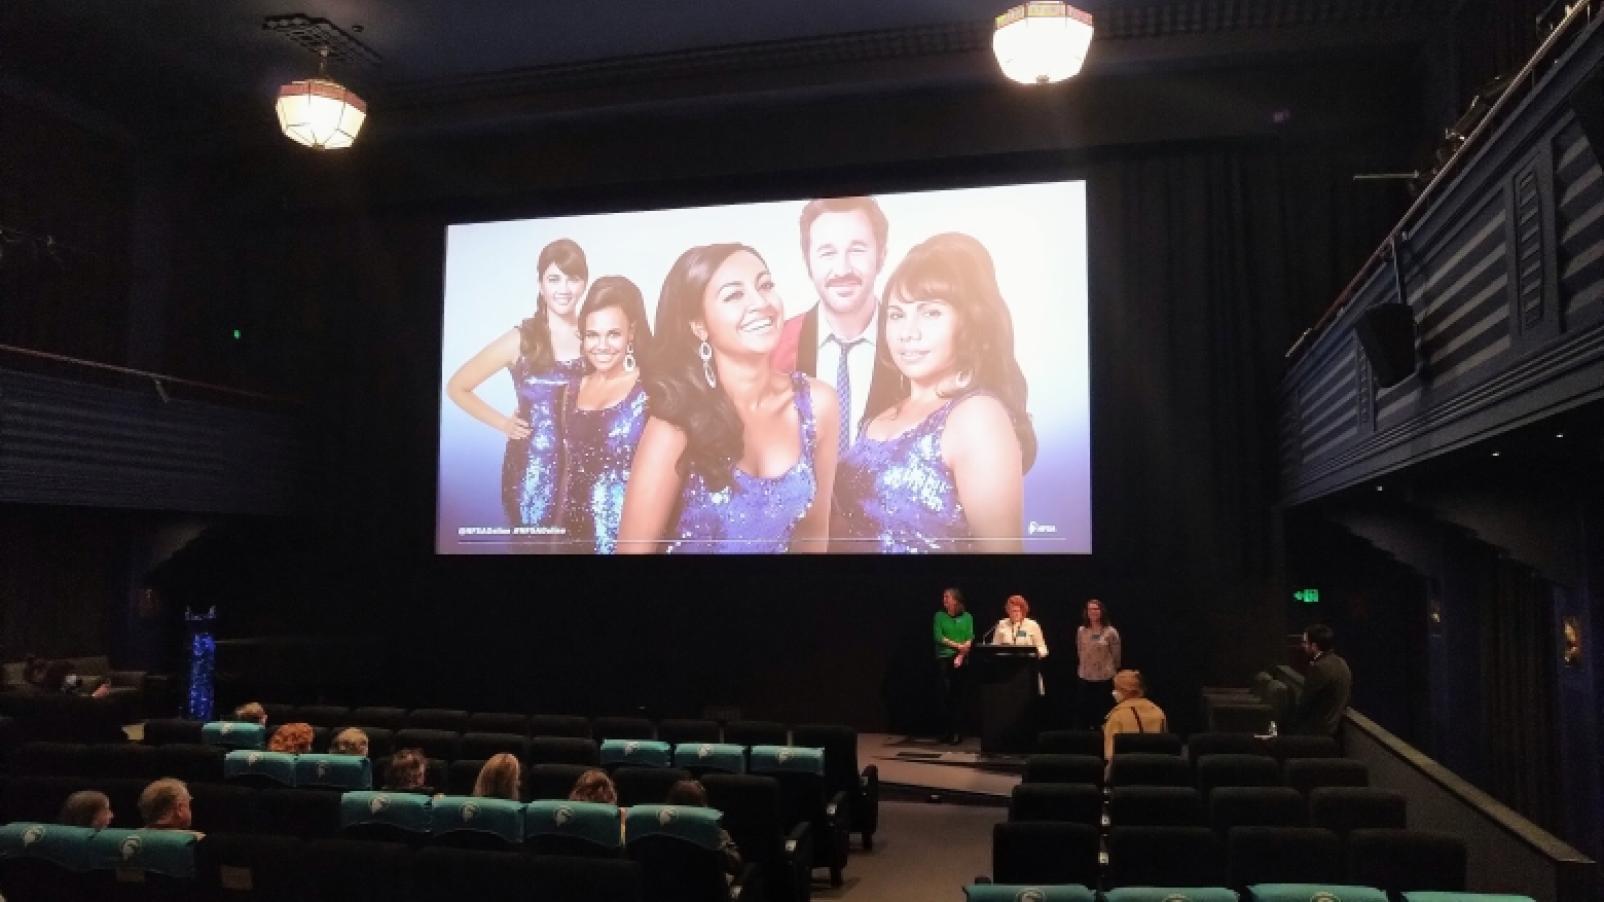 A Dementia friendly film screening of The Sapphires in Canberra.